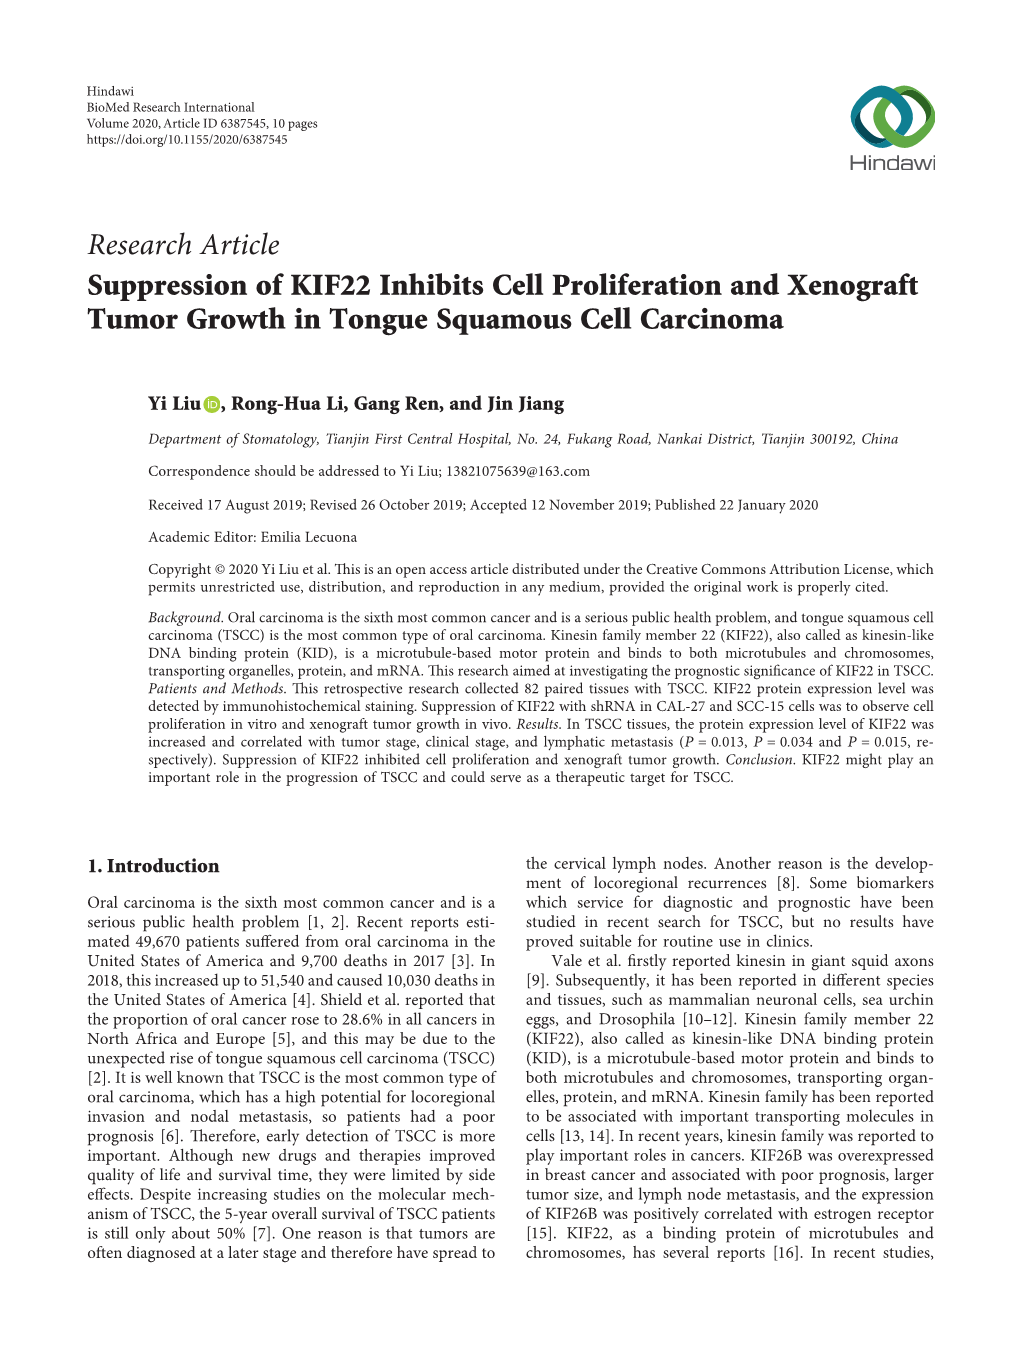 Research Article Suppression of KIF22 Inhibits Cell Proliferation and Xenograft Tumor Growth in Tongue Squamous Cell Carcinoma